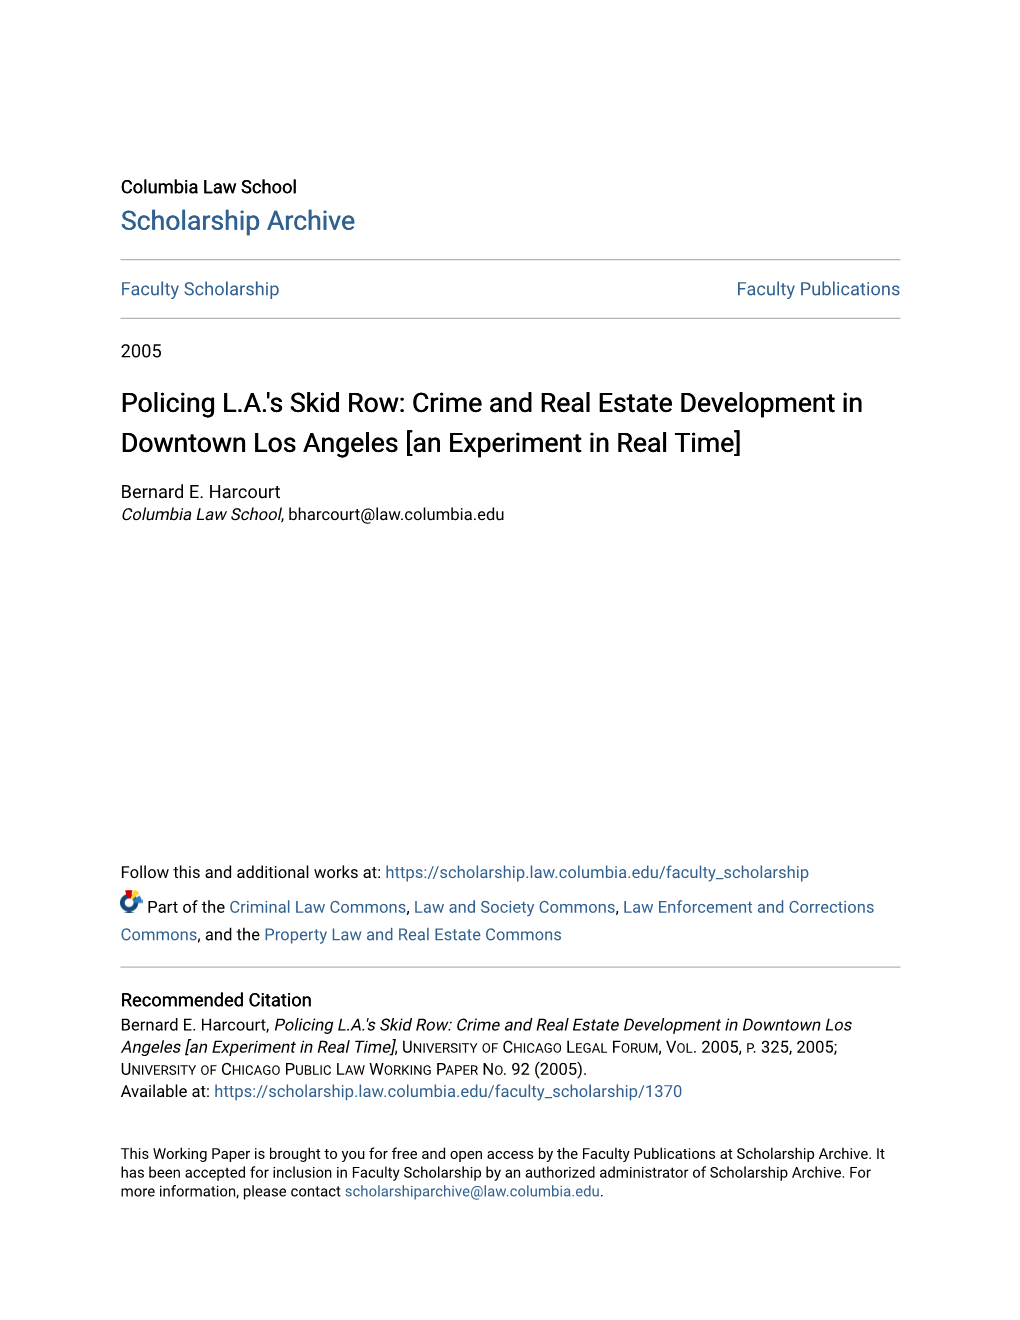 Crime and Real Estate Development in Downtown Los Angeles [An Experiment in Real Time]